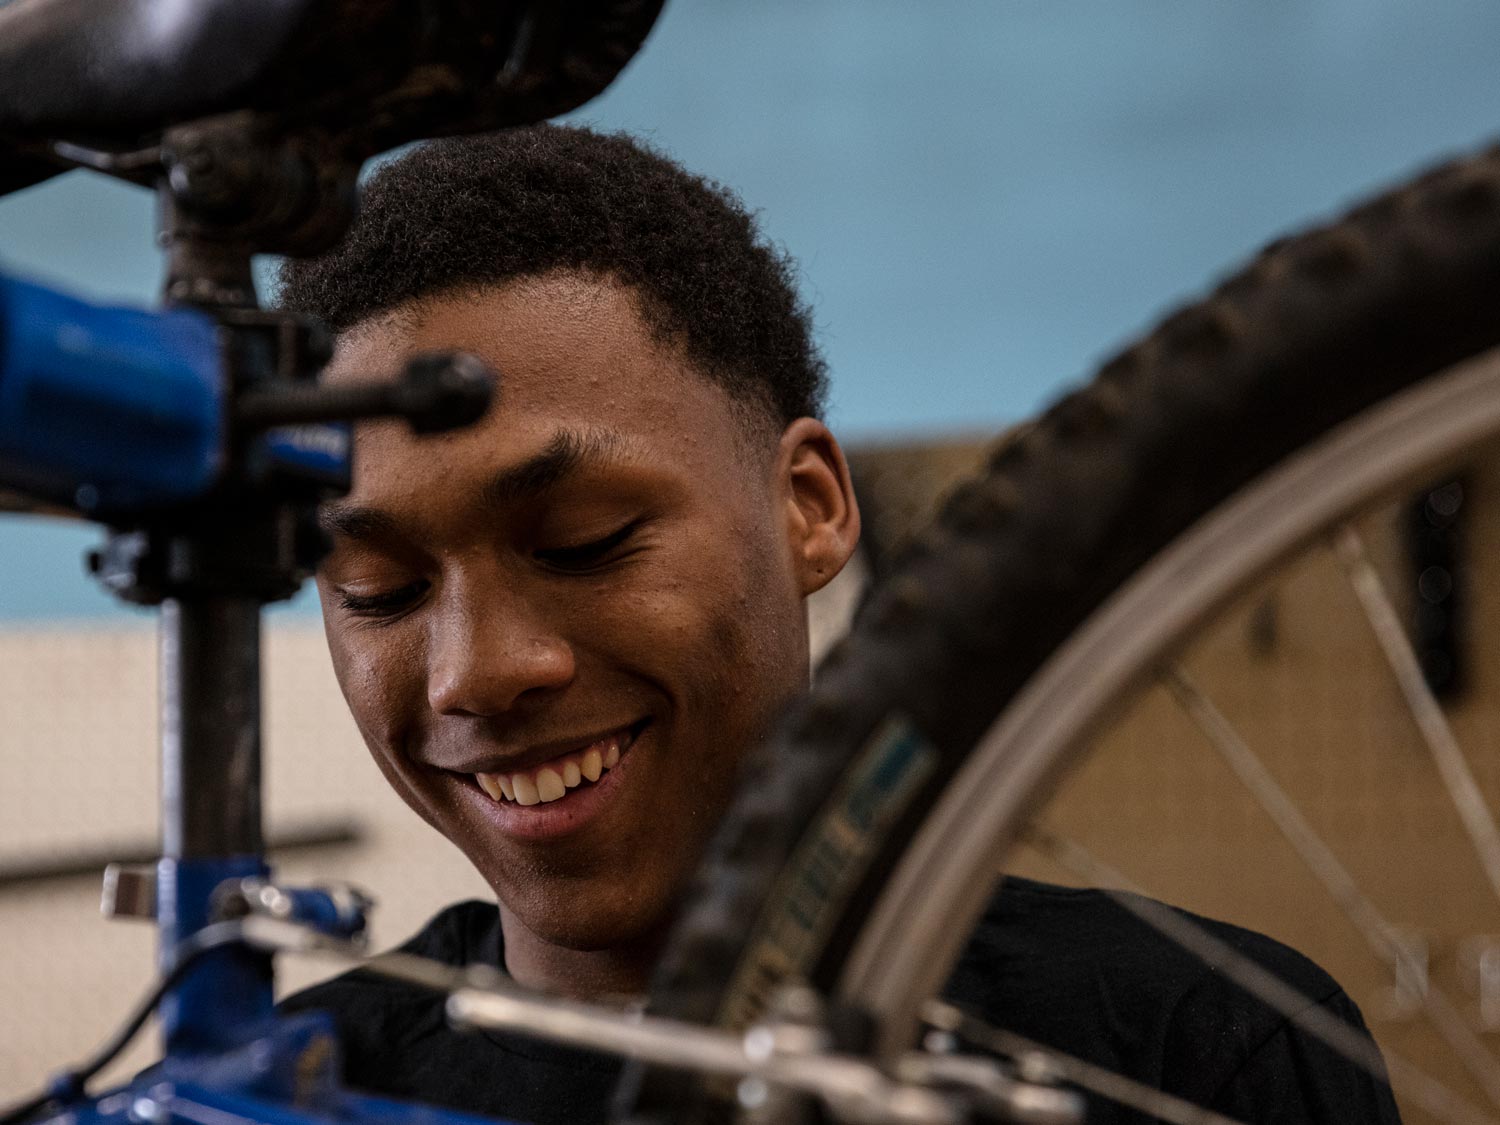 Closeup of smiling man working on a bicycle in a stand.